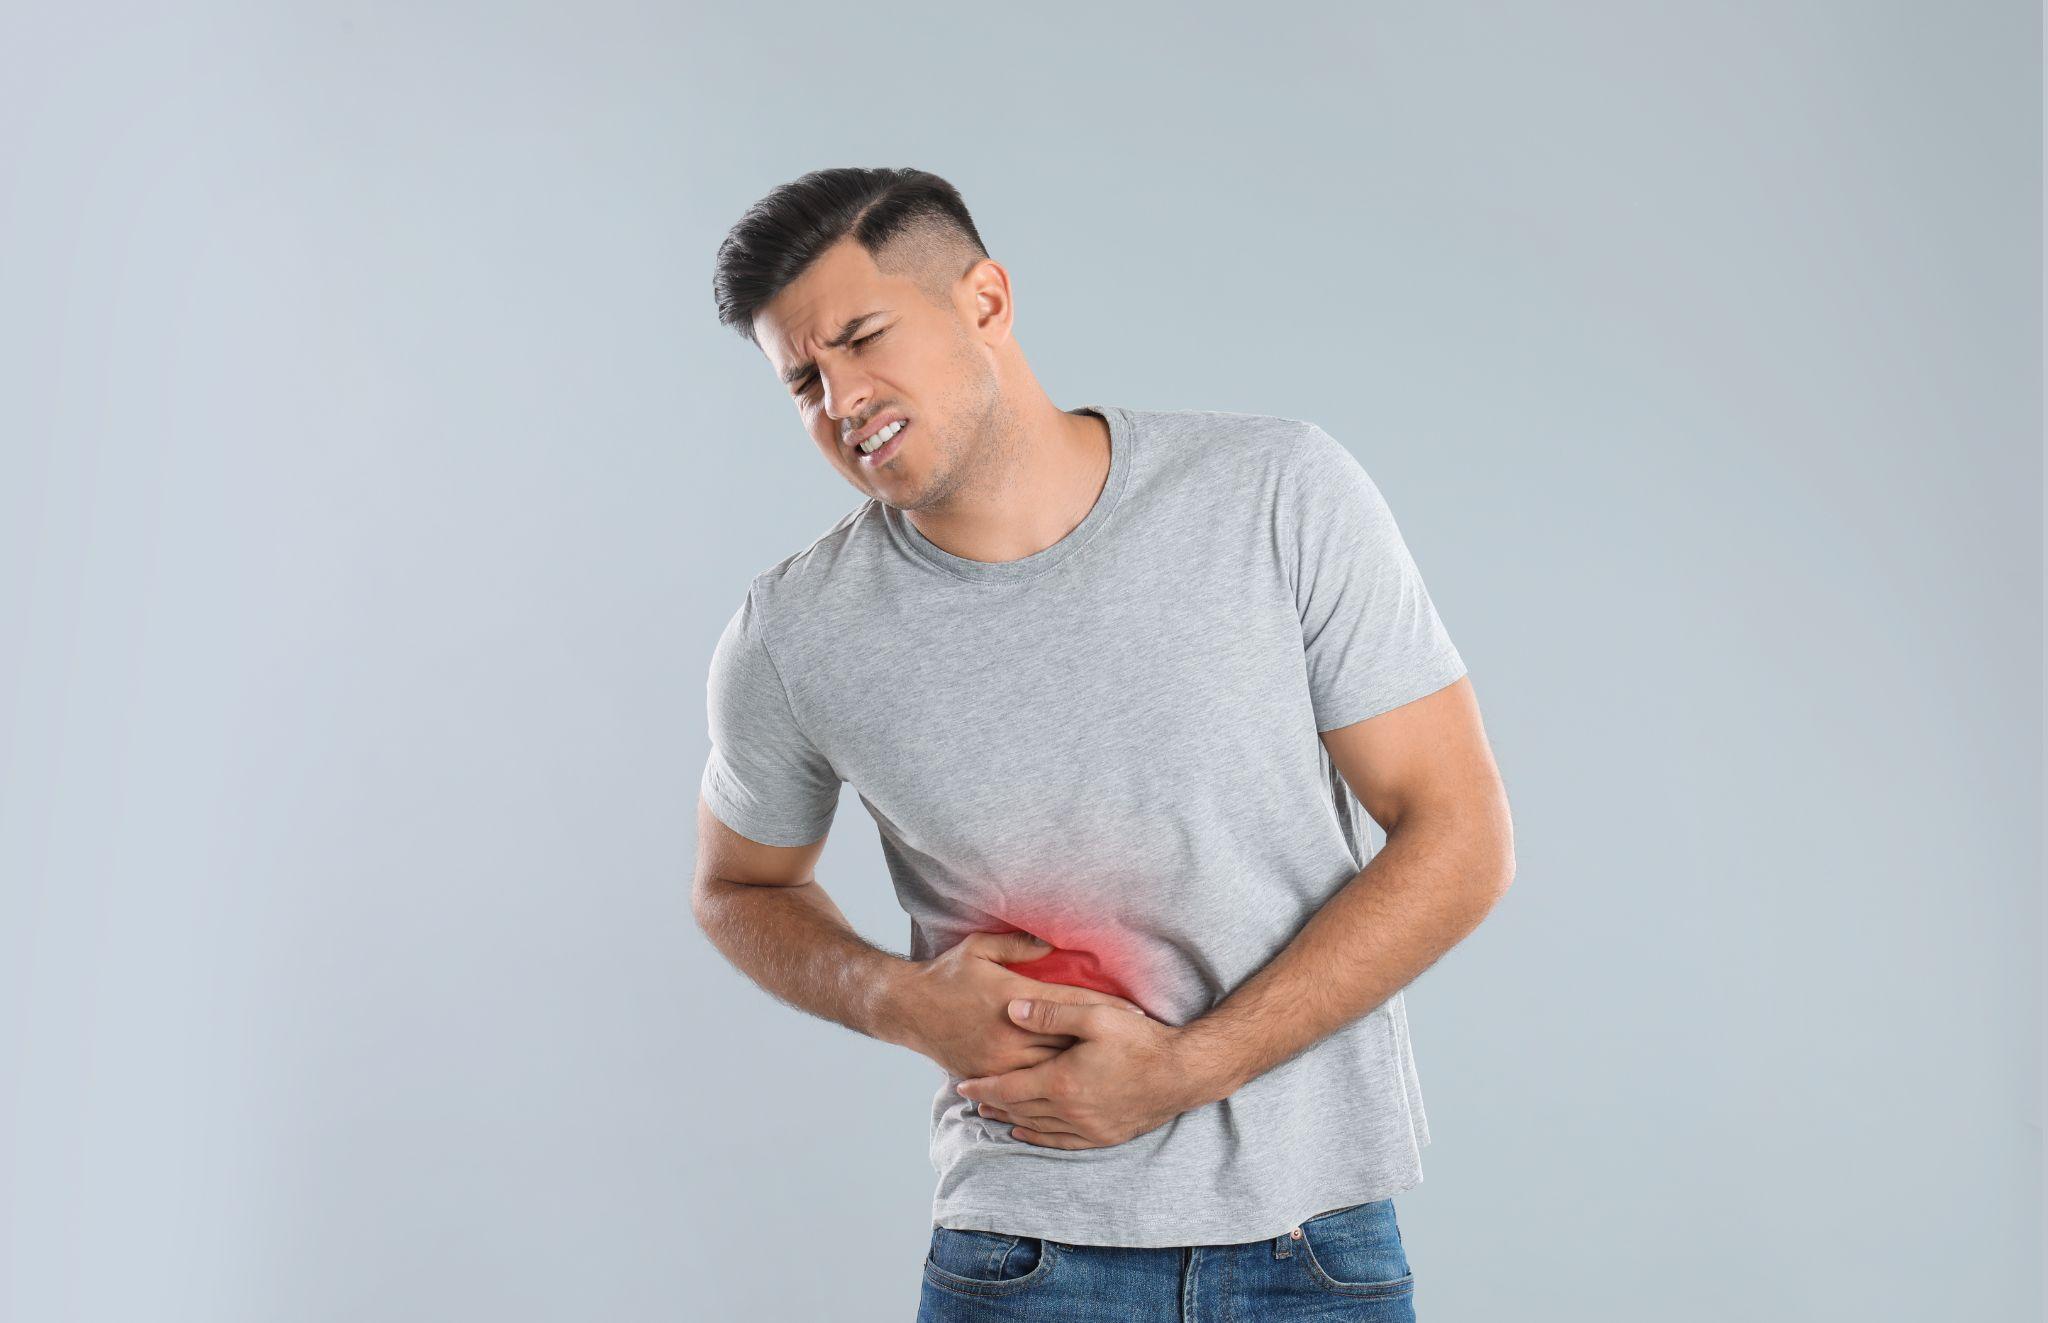 Man suffering from liver pain